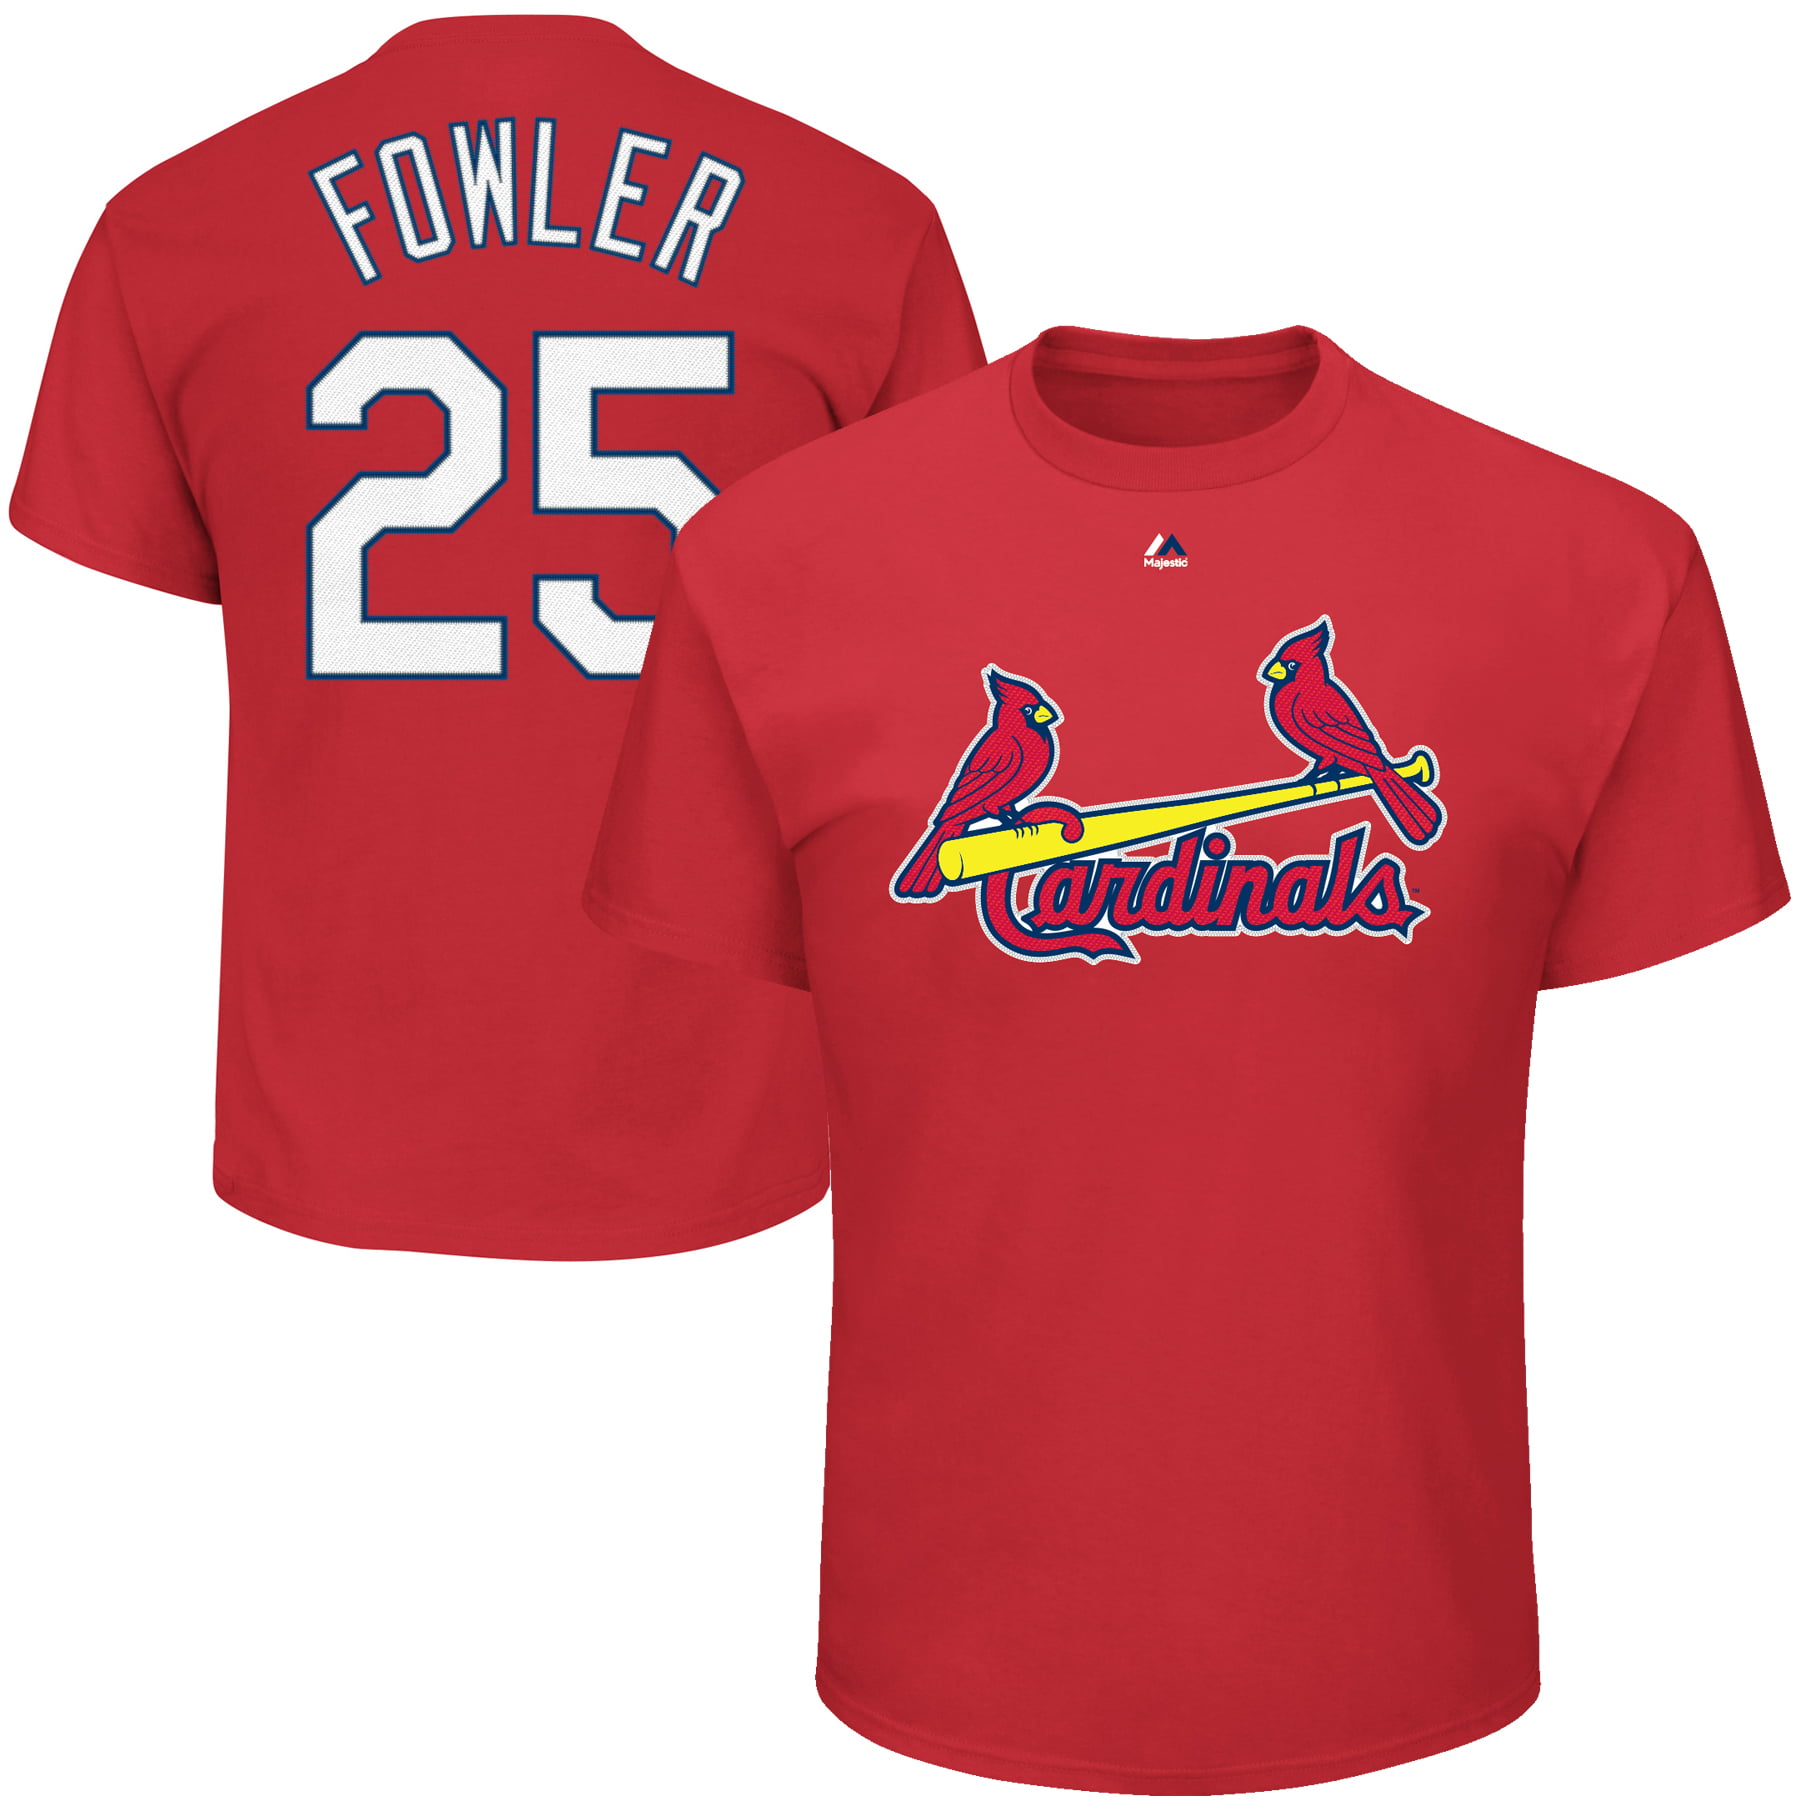 Dexter Fowler St. Louis Cardinals Majestic Name & Number T-Shirt - Red - www.waterandnature.org